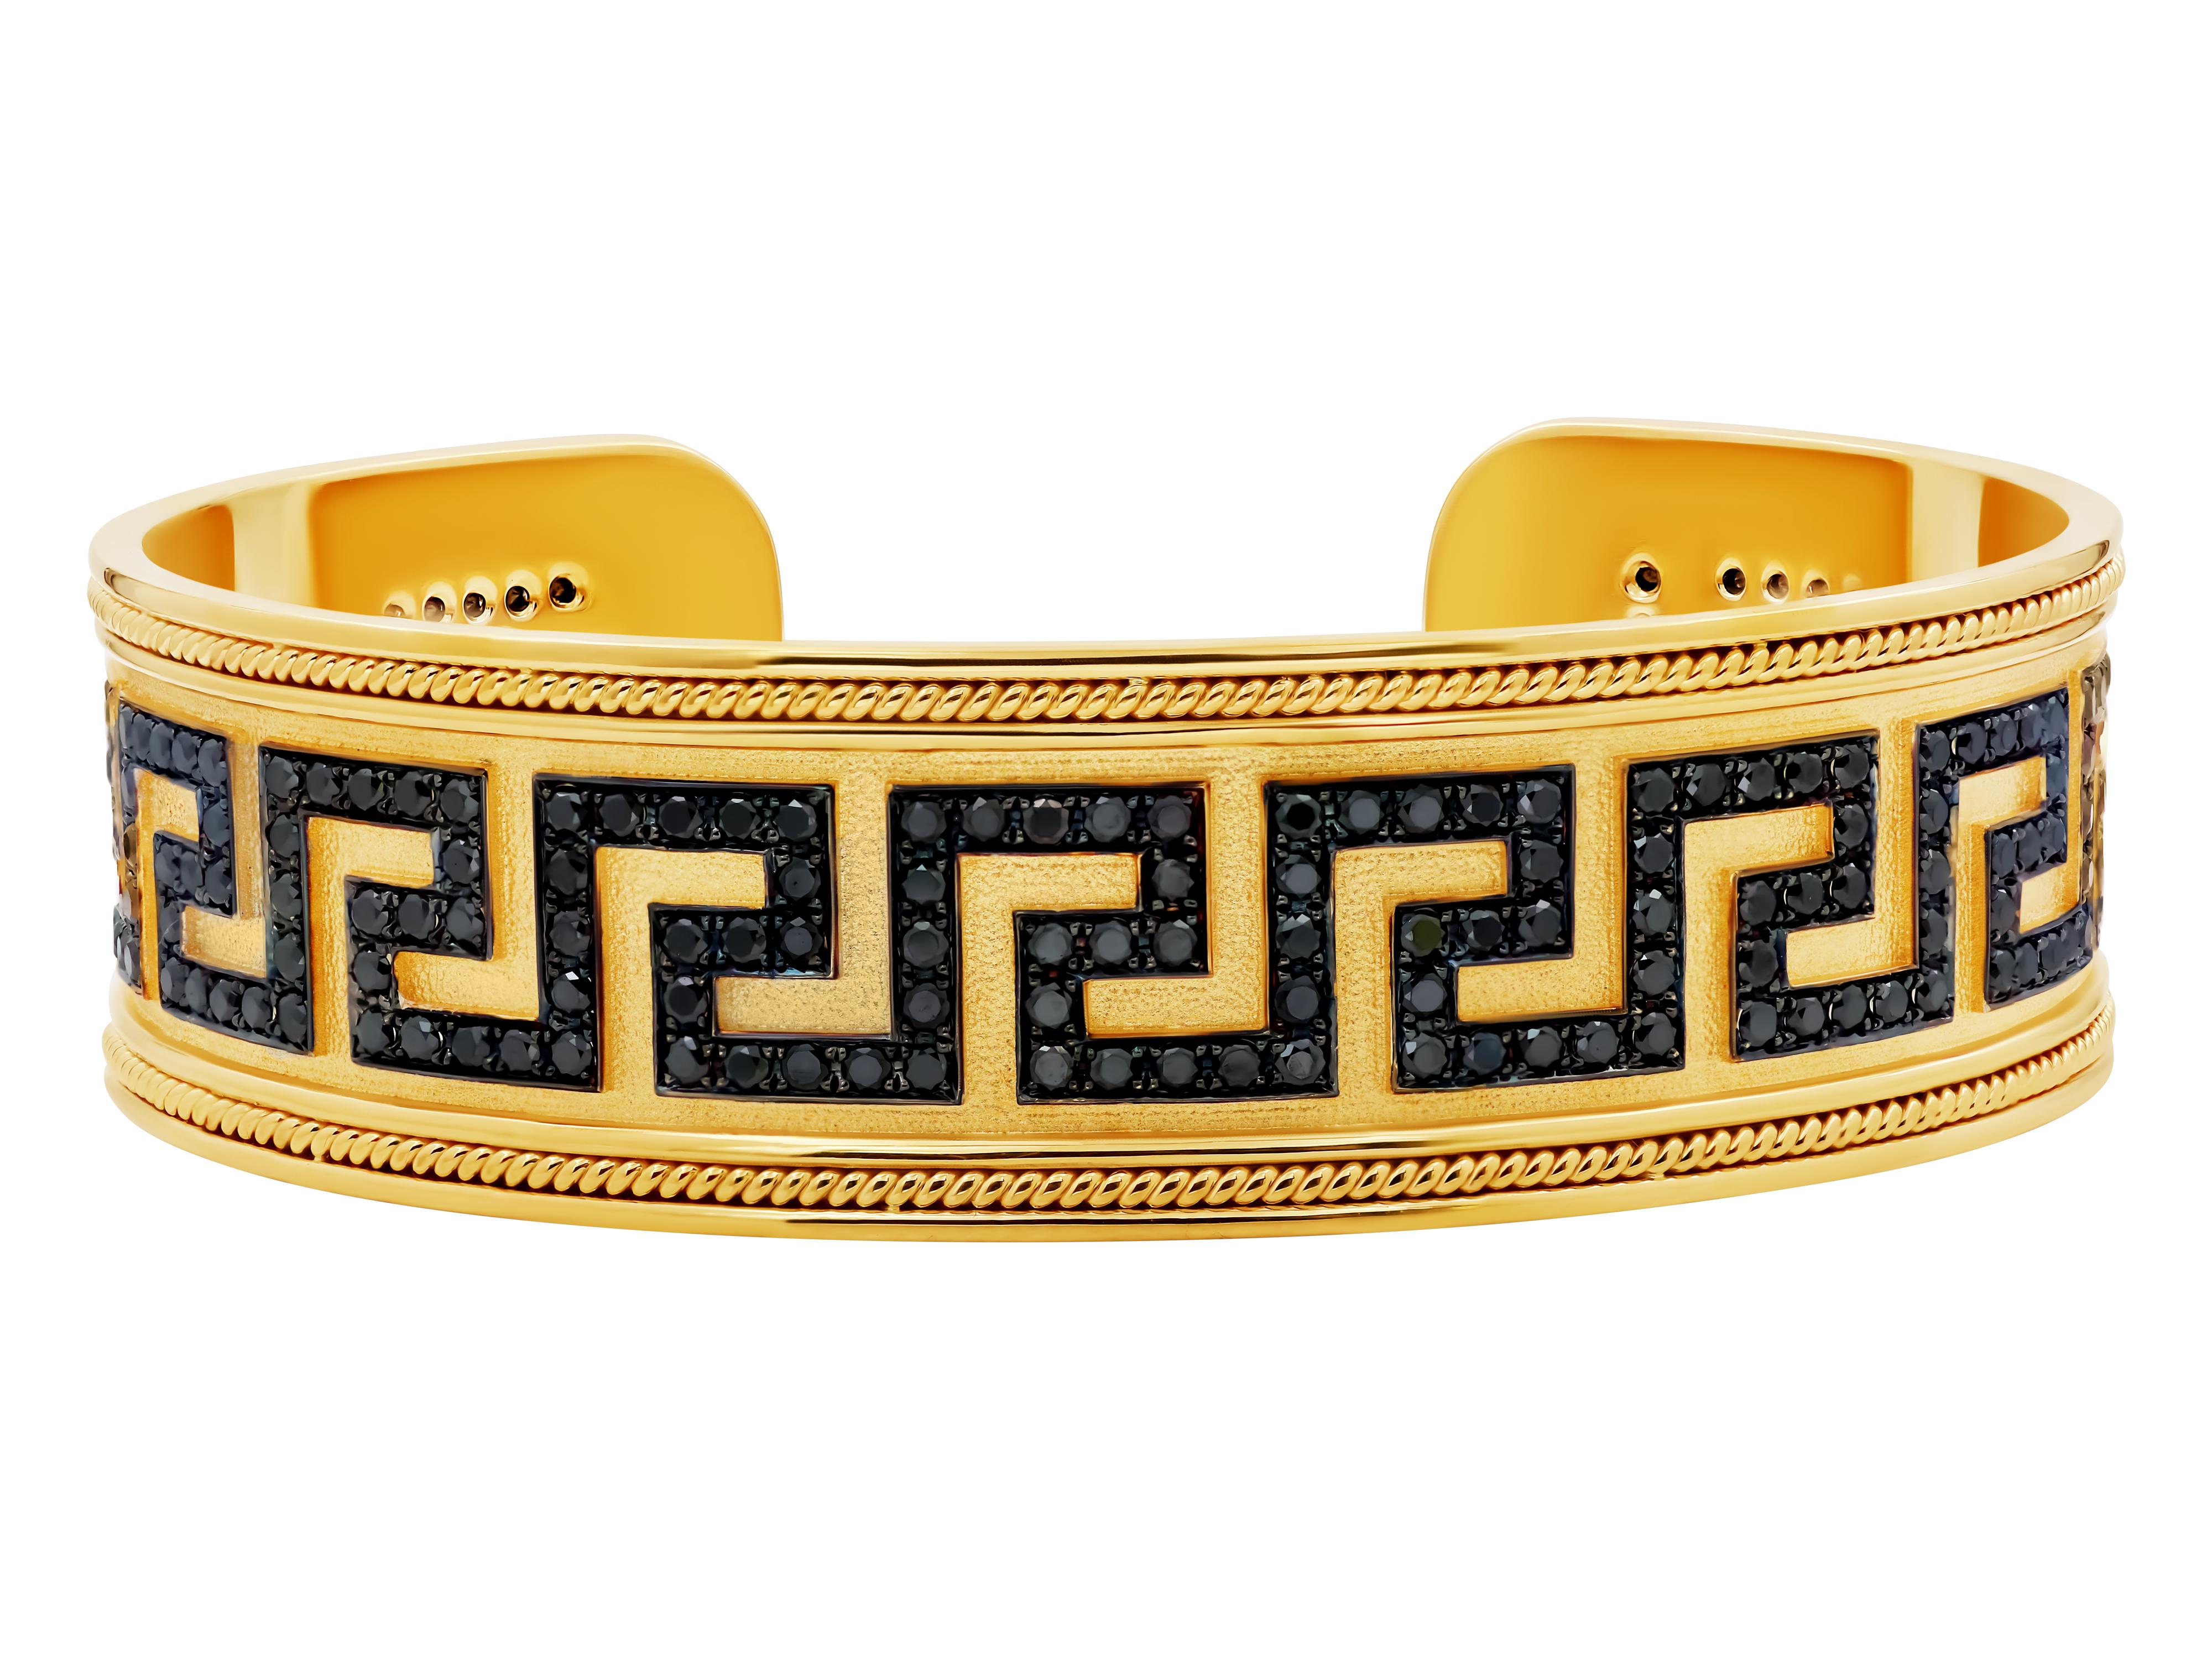 Greek key cuff bracelet handmade by Dimos in 18 karat gold with 4.02 carats natural brilliant cut black diamonds. 
Handmade filigrees the settings in a solid and heavy cuff that can be dressed up or down from a pair of jeans to a formal gown.